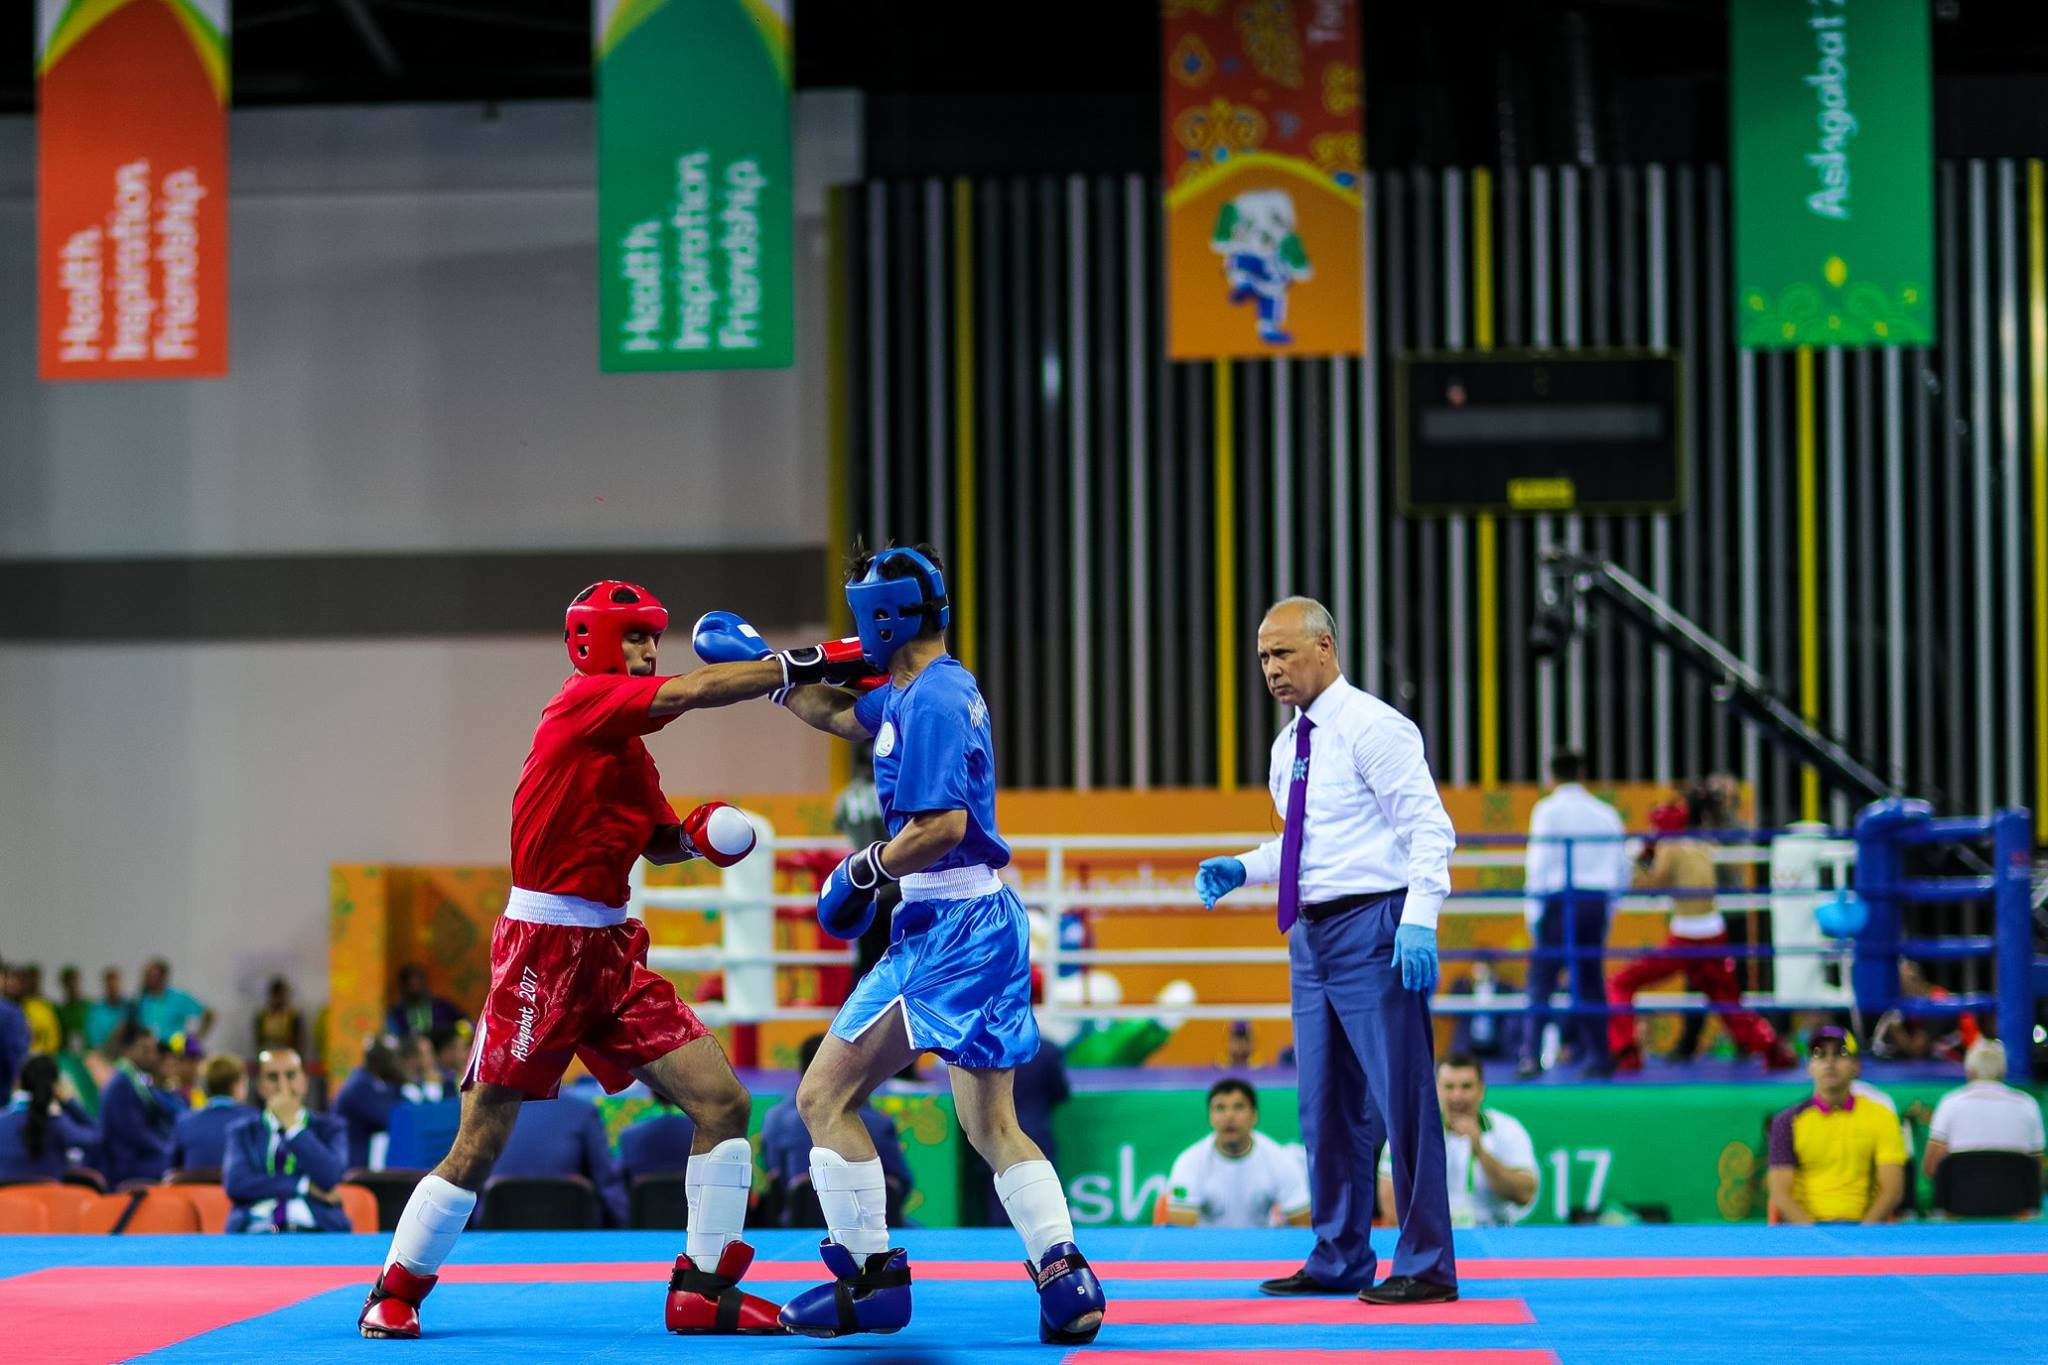 Medals were awarded on the second day of kickboxing action ©Ashgabat 2017/Facebook